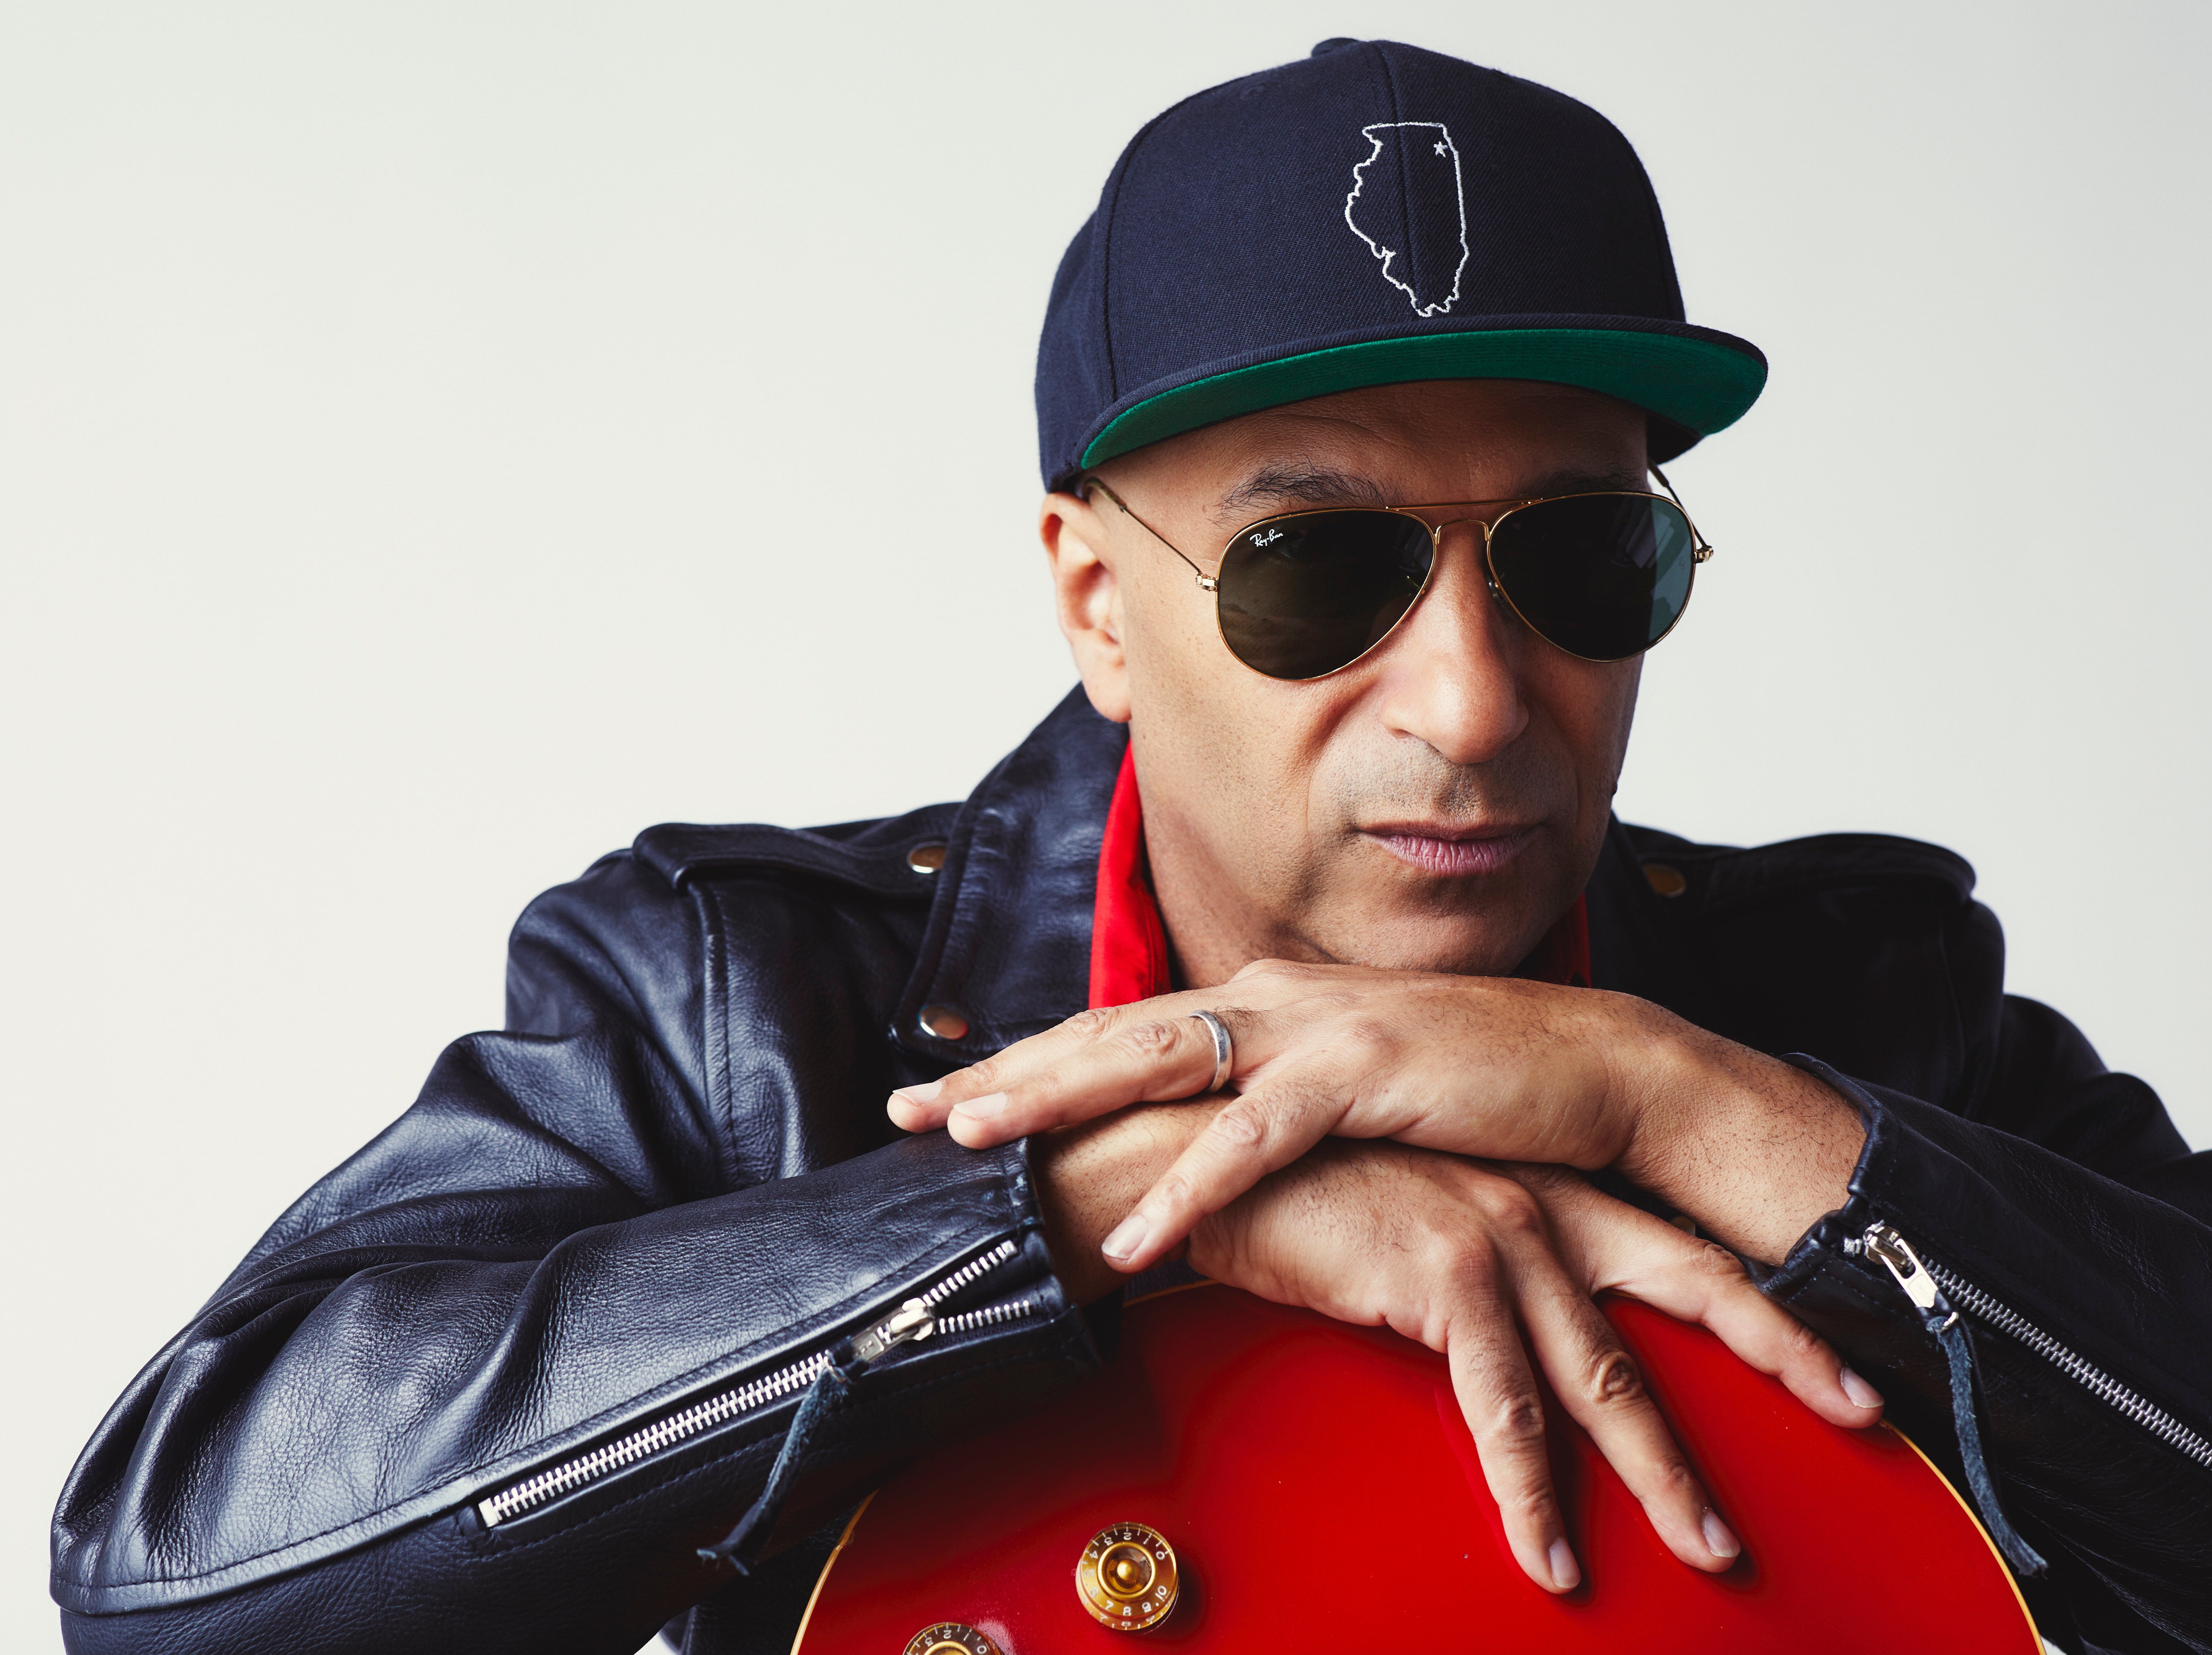 Tom Morello: 'This ended up being the most prolific recording period of my life’